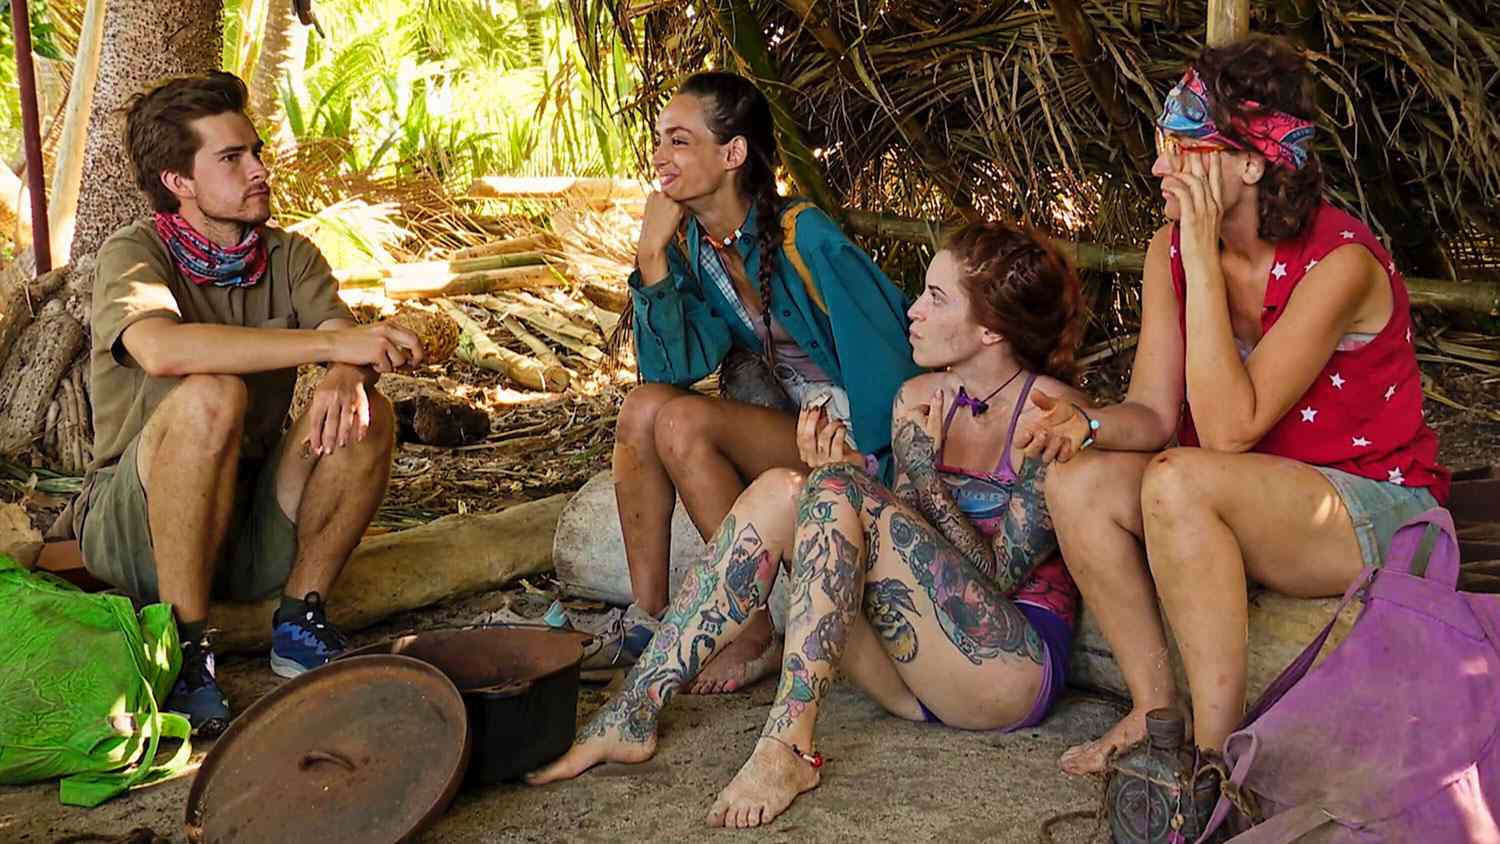 ‘Survivor’ Recap: Season 46 Breaks the Record for Most Players Voted Out with Idols In a Season After Episode 11